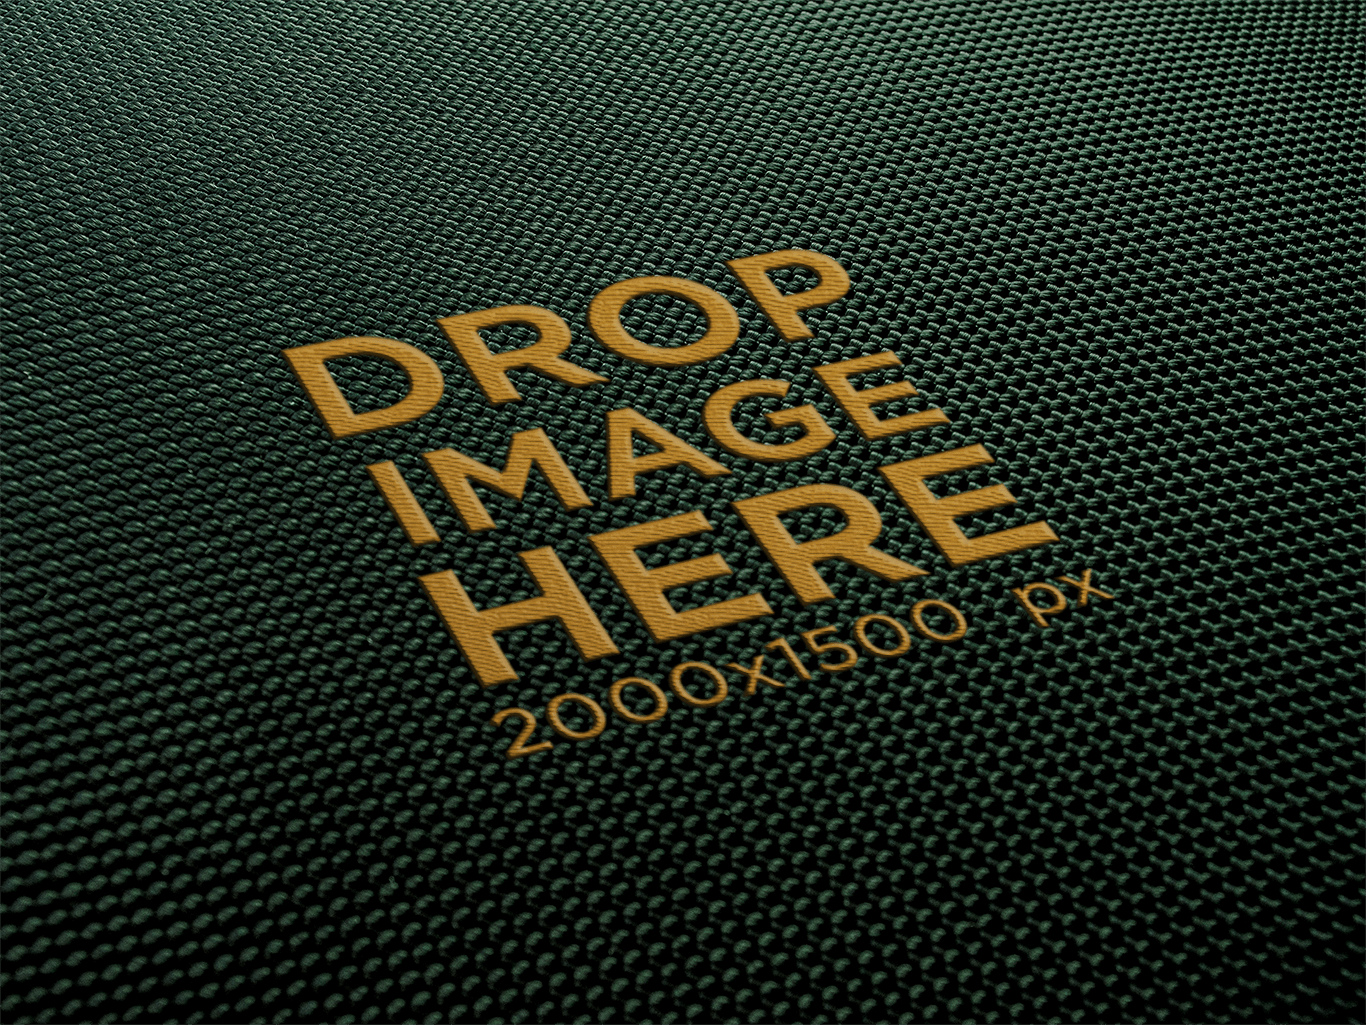 Download Fabric Embroidered Logo Mockup Free - Free Download Mockup